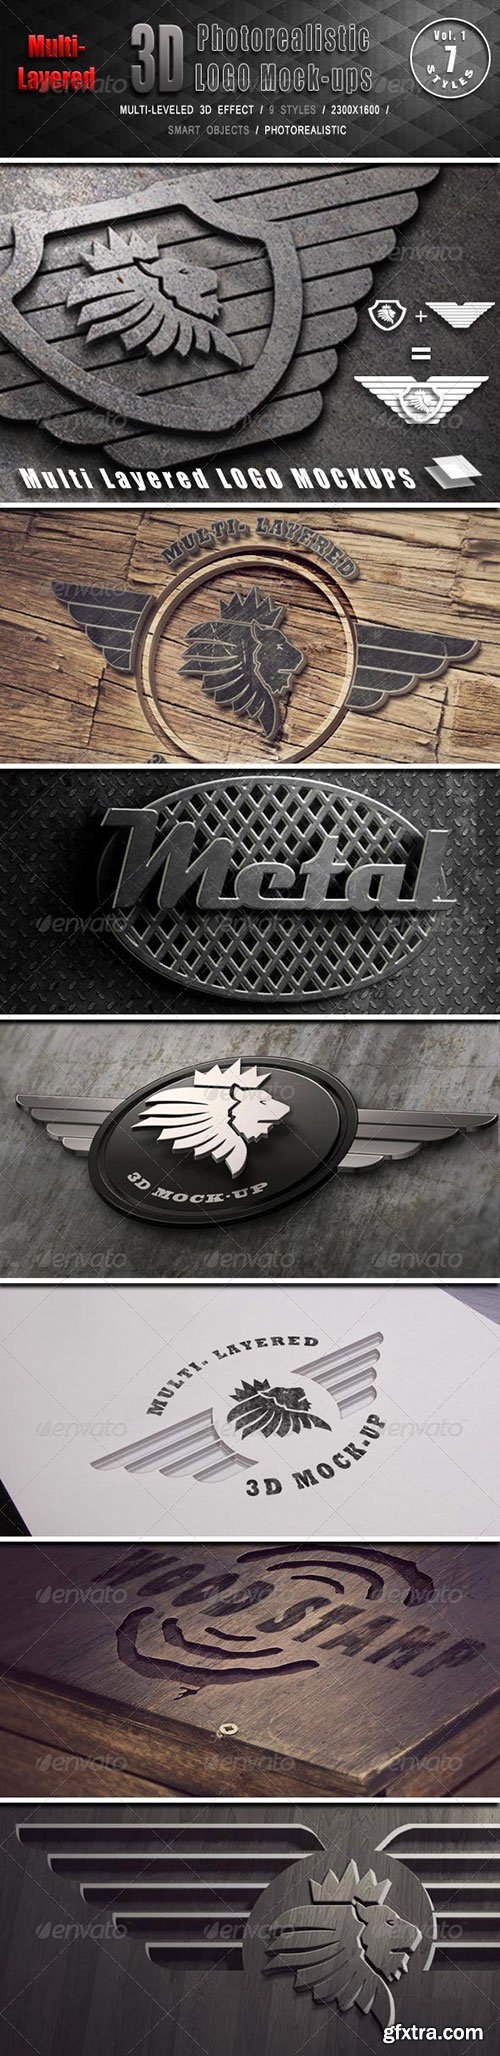 GraphicRiver - Photorealistic Multi-Layered 3D Logo Mock-Up